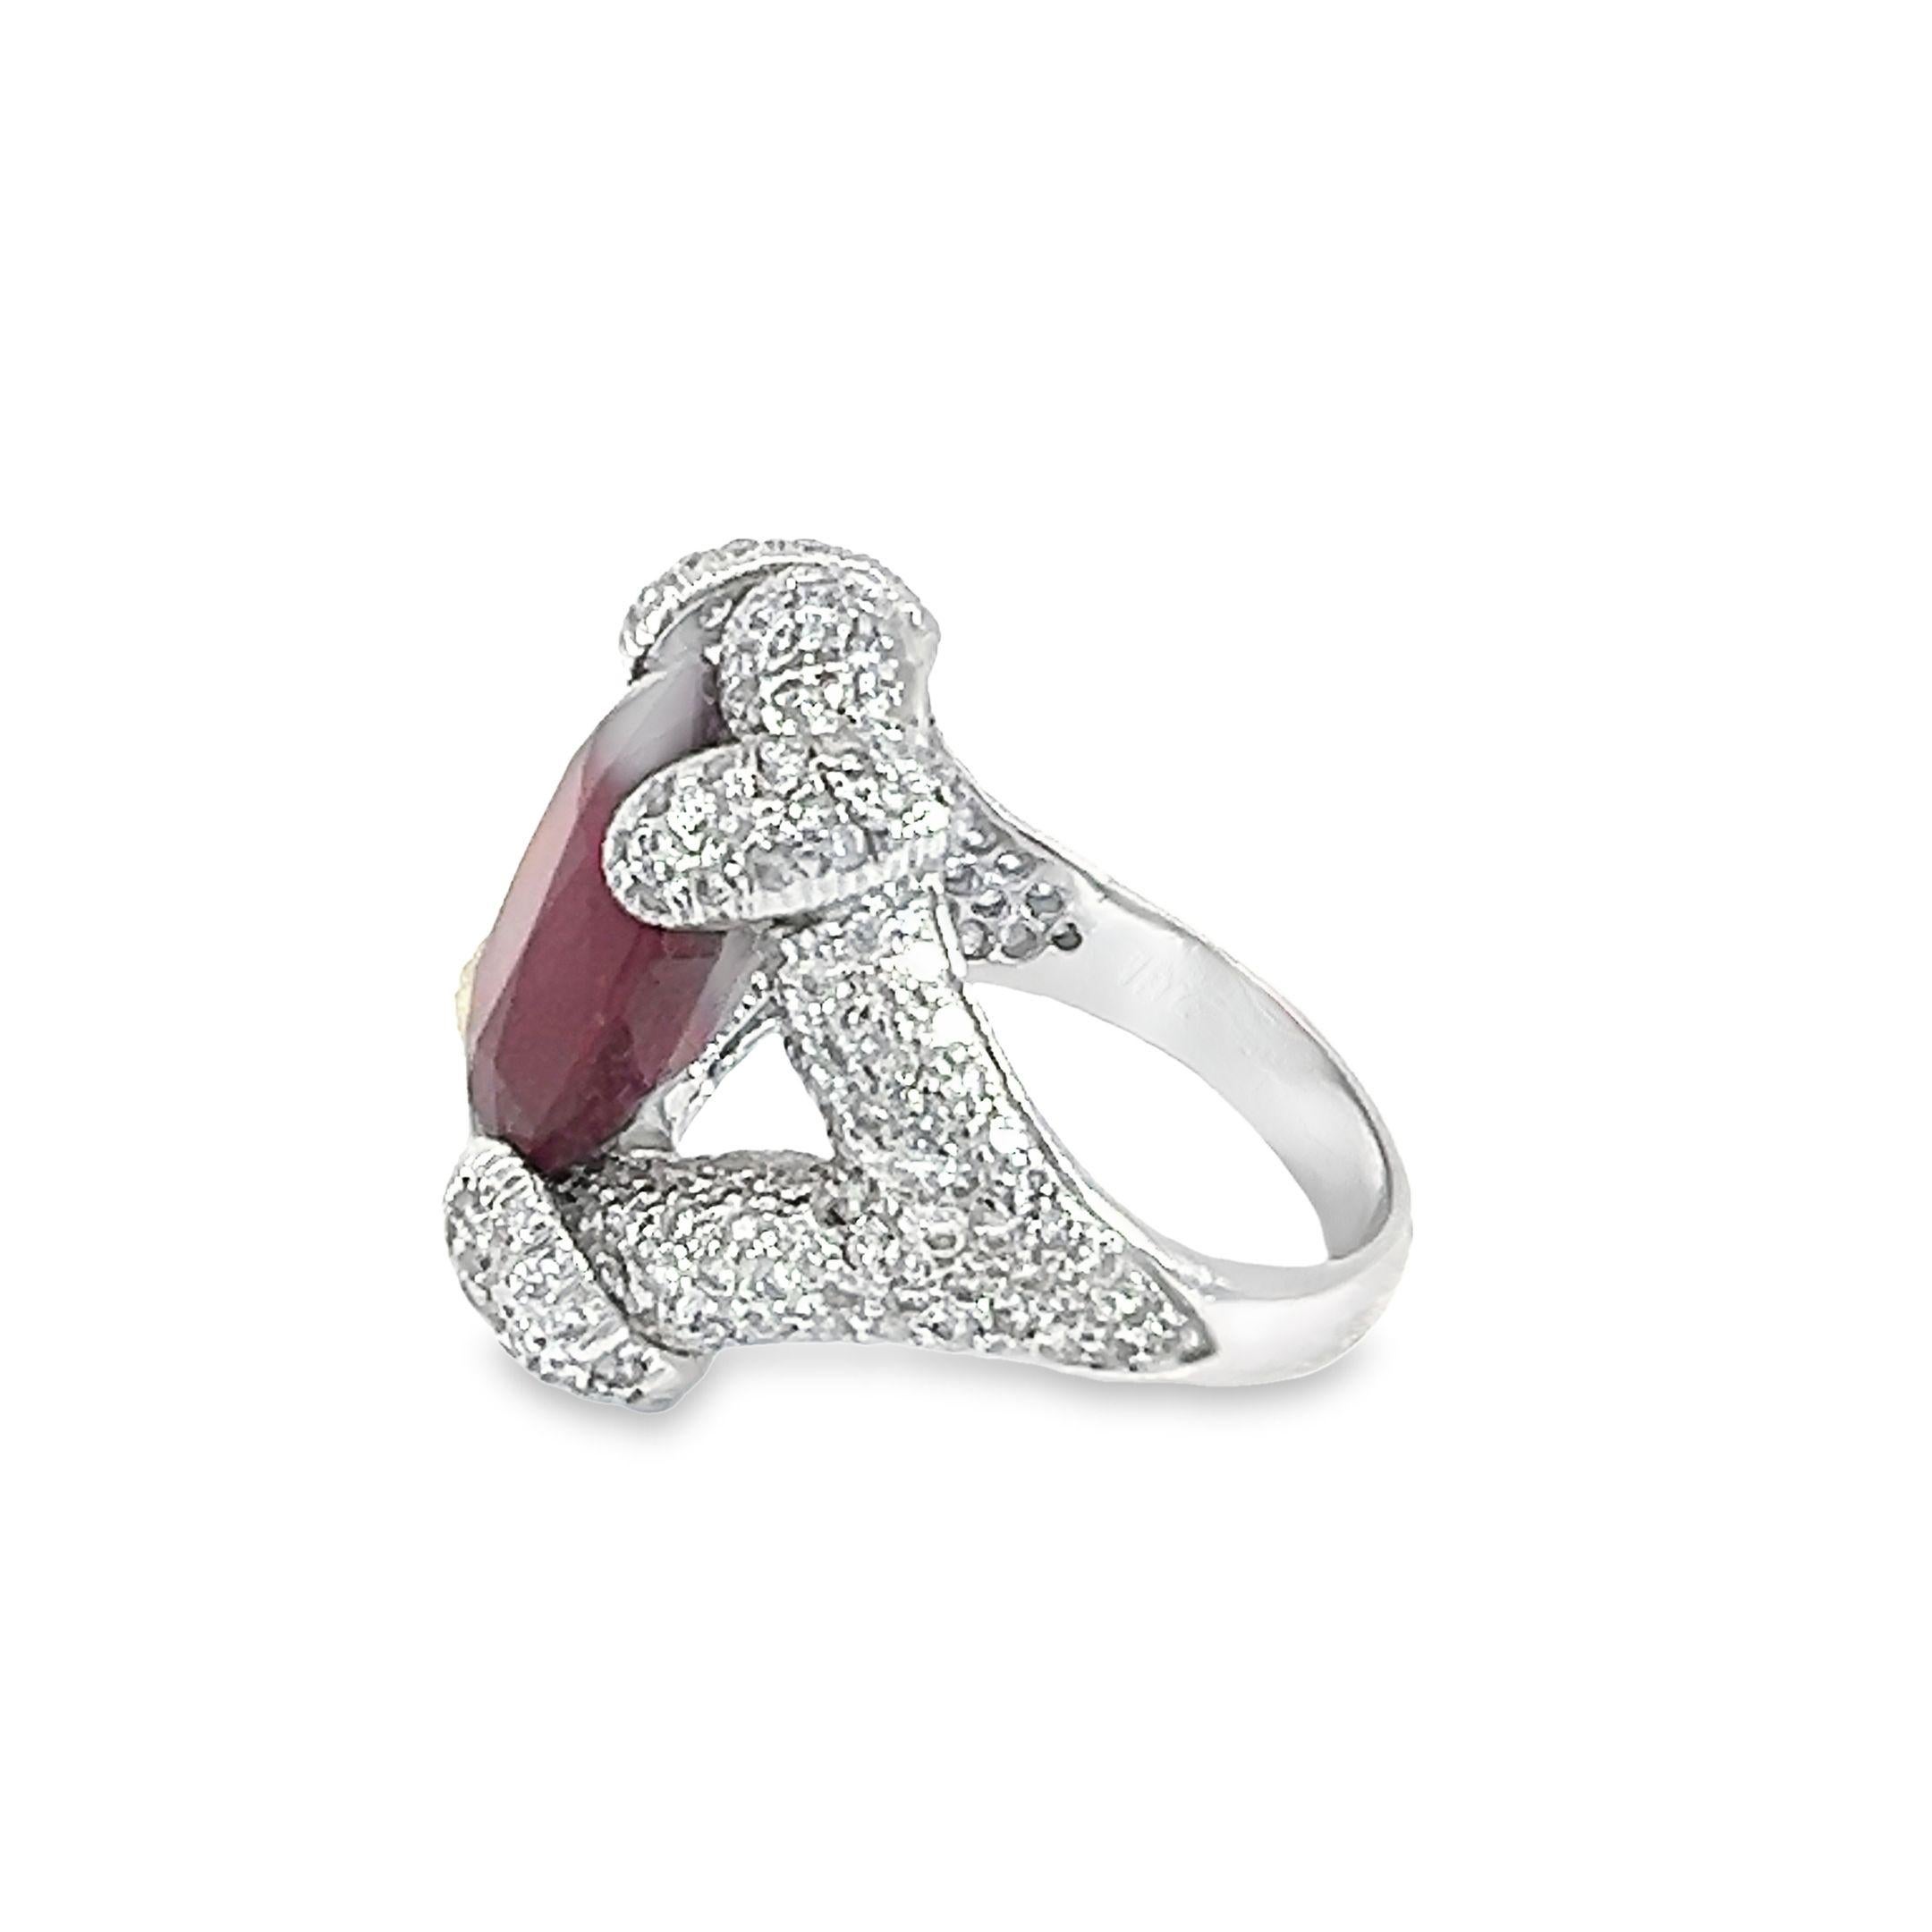 A beautiful natural glass filled Ruby Diamond ring set in 18Kt gold For Sale 3